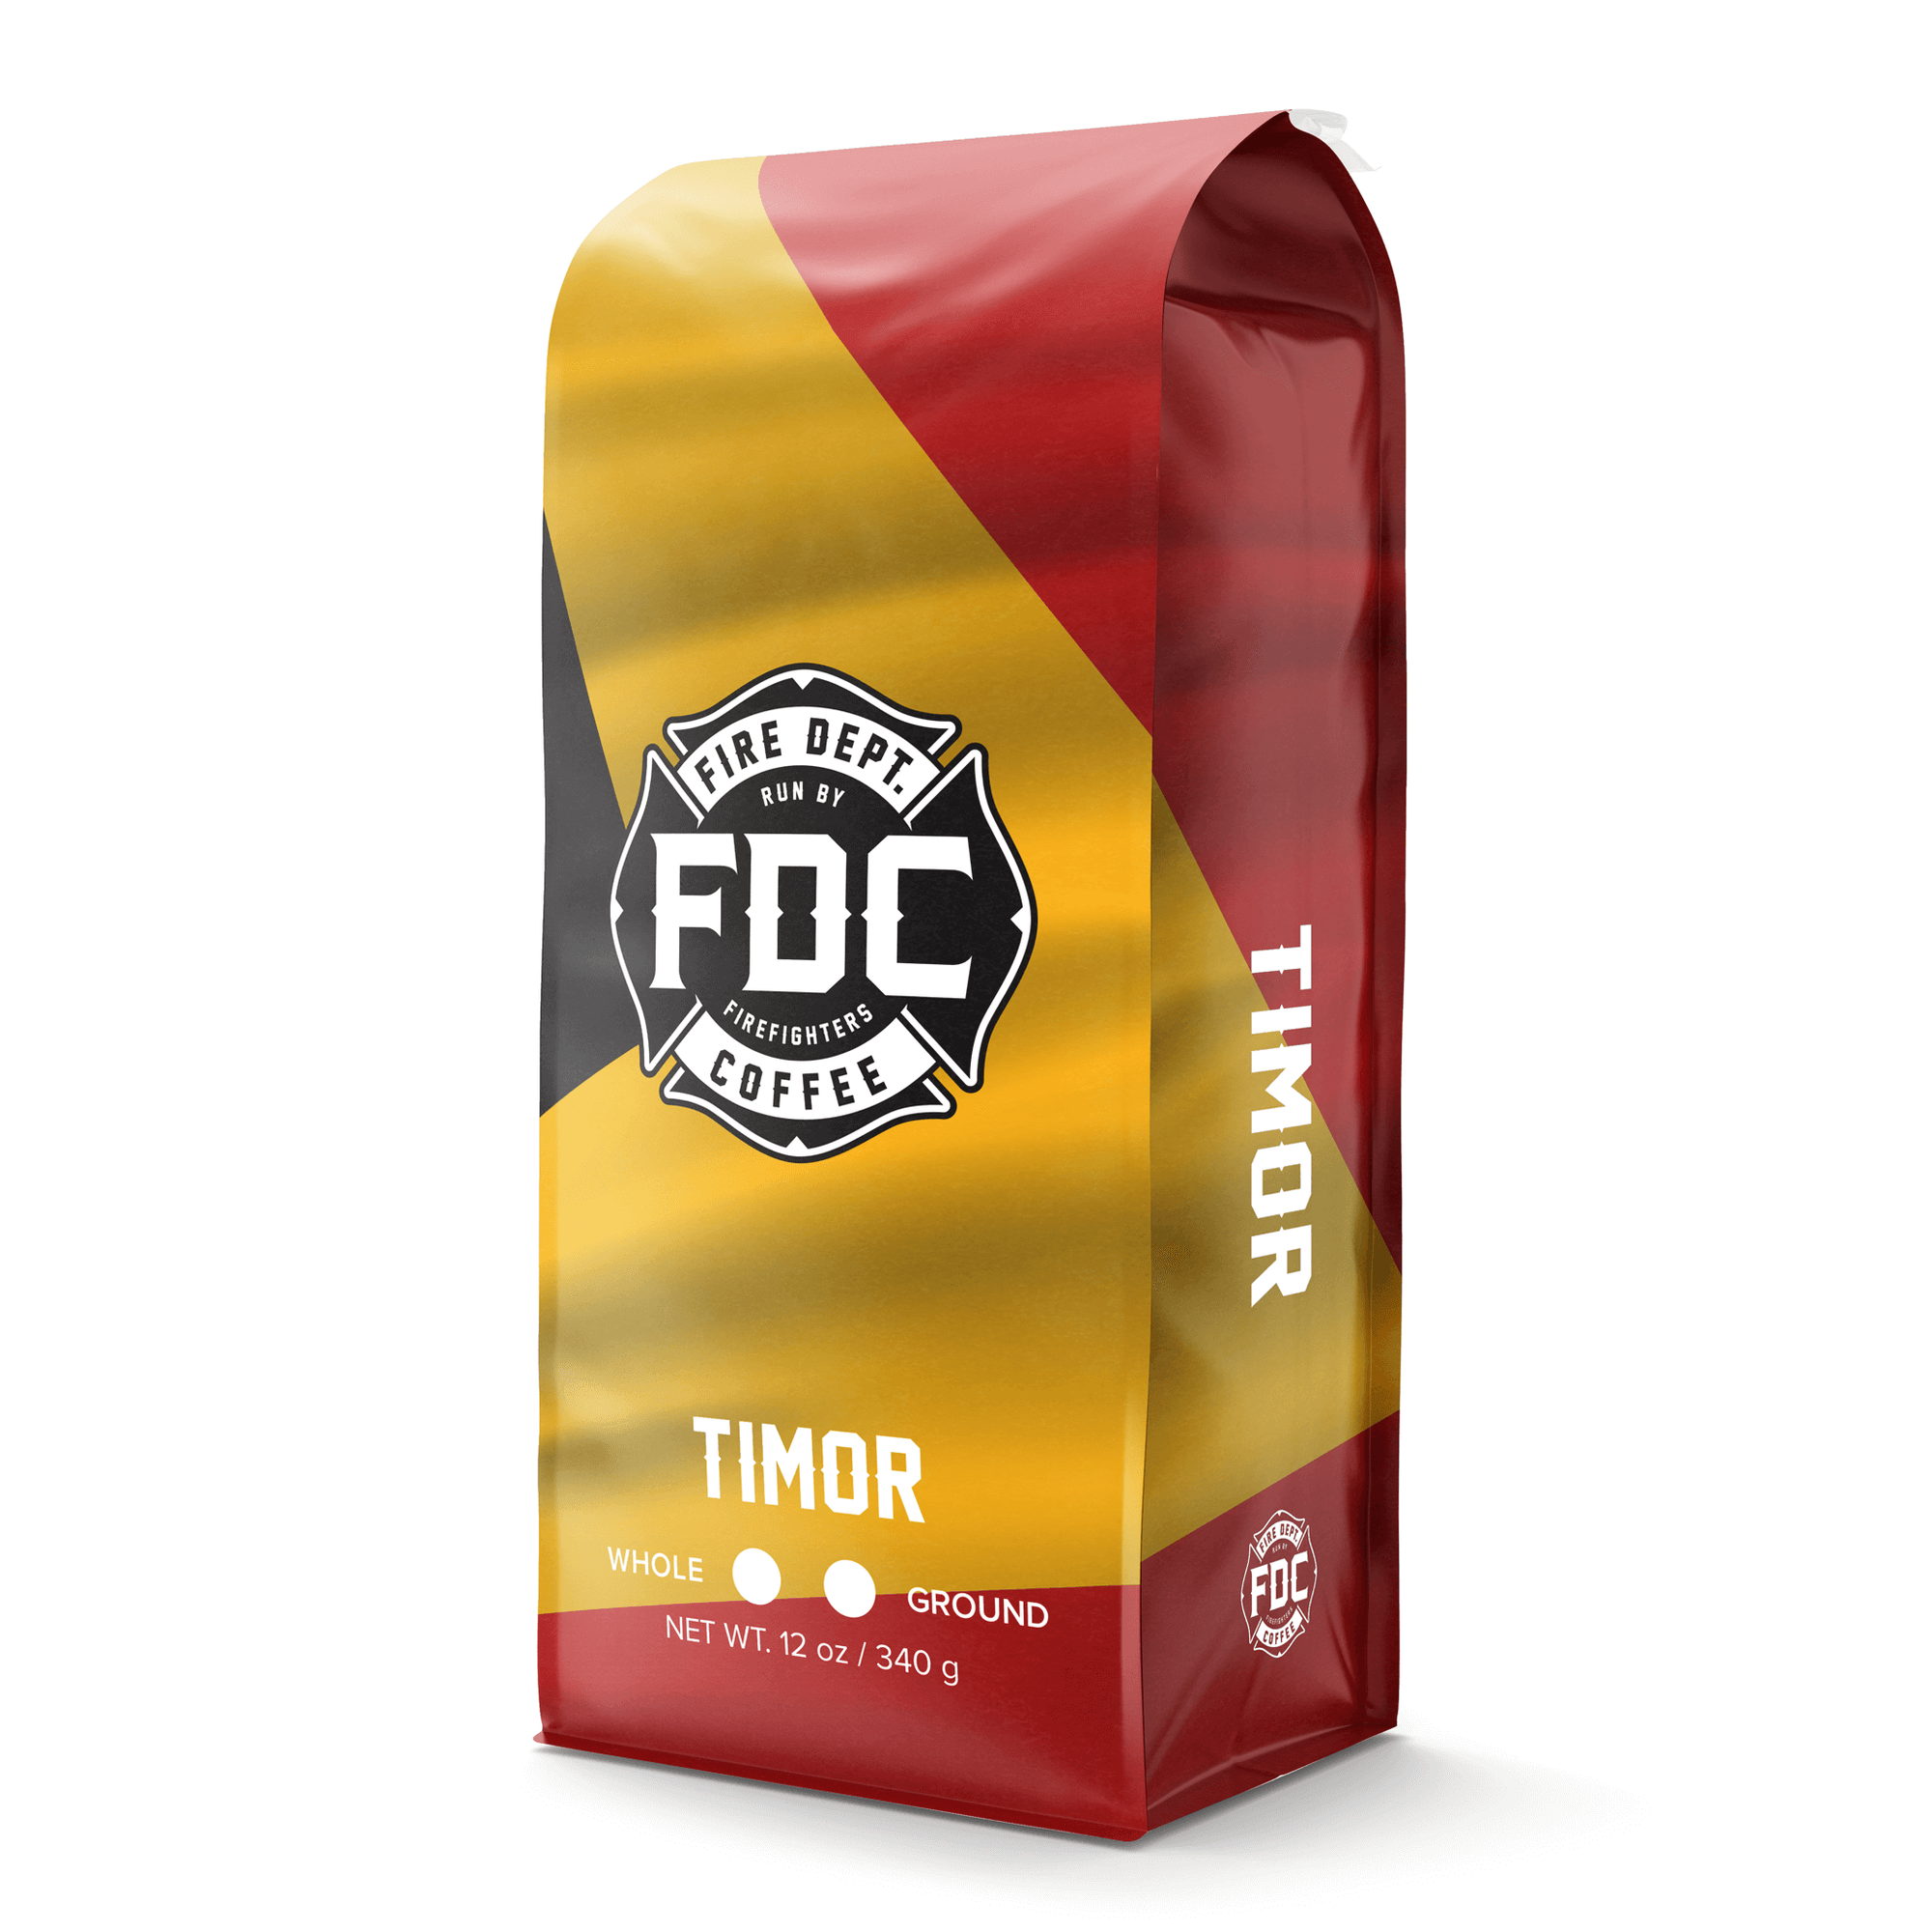 Fire Dept. Coffee's 12 ounce Timor Coffee in a rectangular package